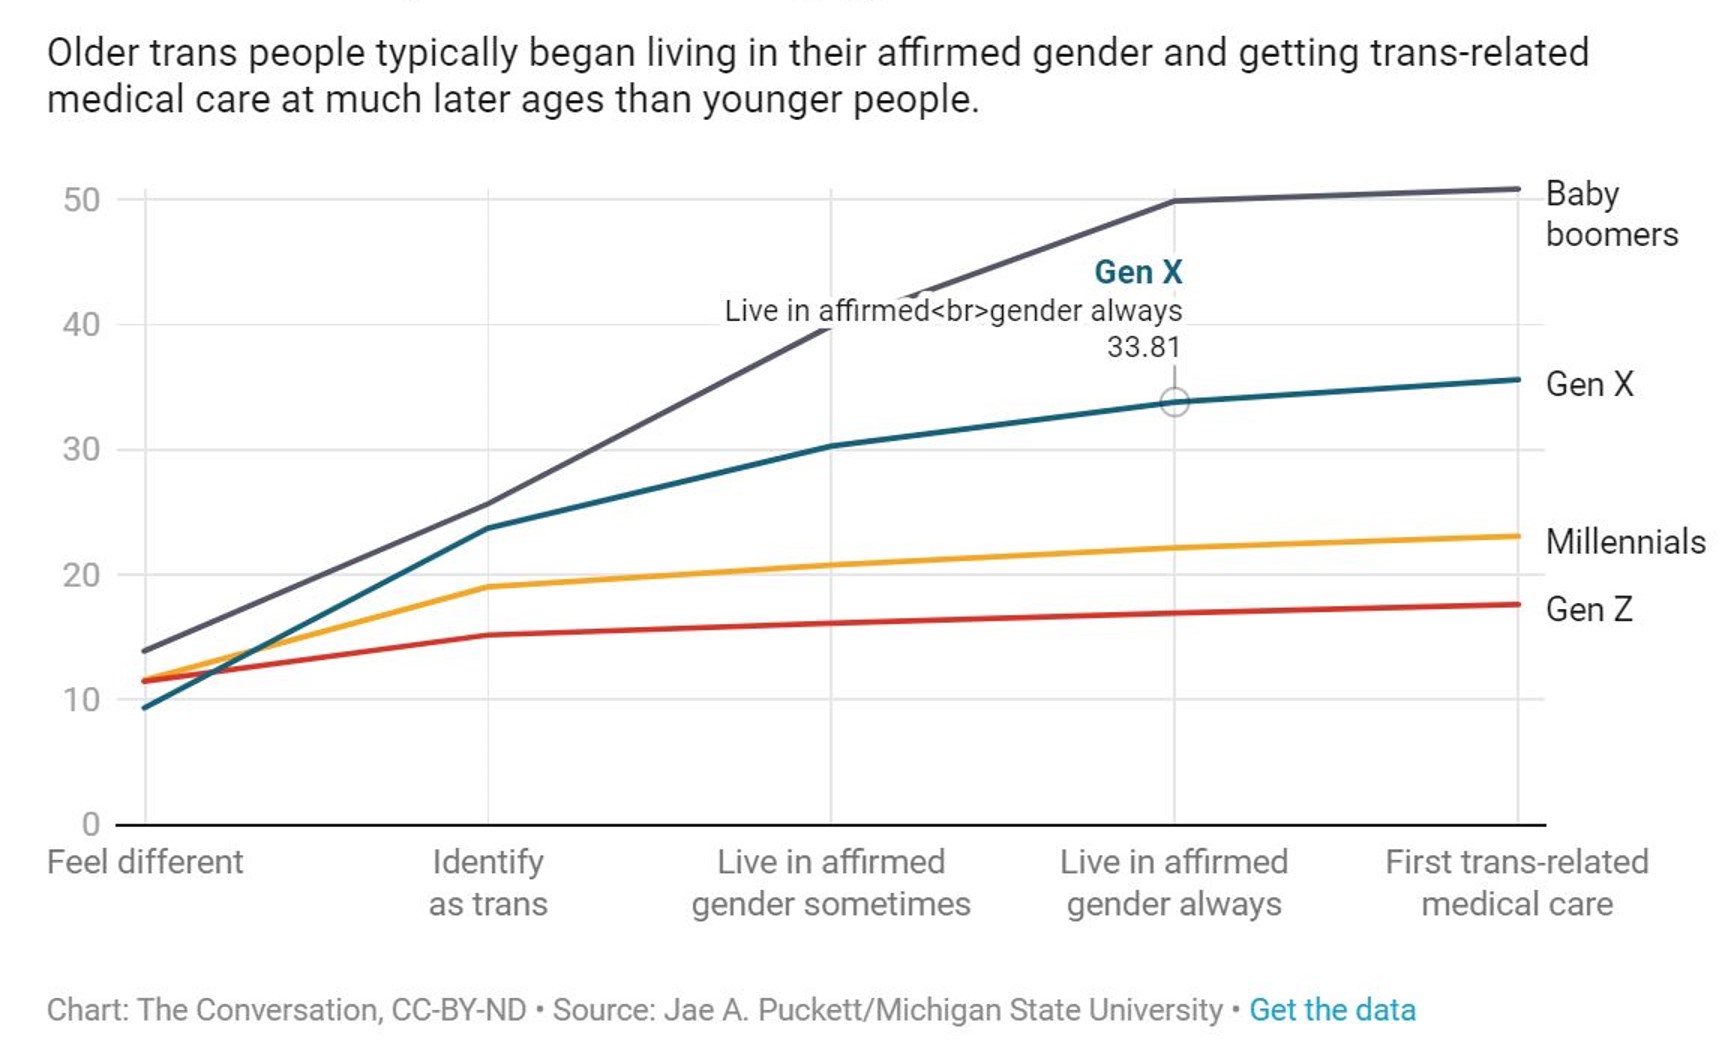 This graph shows different stages of transitioning on the horizontal axis, from first feeling different, to identifying as trans, to living in affirmed gender sometimes, to living in affirmed gender always, to having the first trans-related medical treatment. The vertical axis shows a person's age. There are four lines graphed, one for each group of people - Generation Z (born most recently), Millenials, Generation X, and Baby Boomers (born 1945-1965). The Baby Boomer line shows that the transgender among this group of people went through the stages of transitioning at older ages than the the transgender people in the younger cohorts. For example, Boomers typically didn't have their first trans-related medical care until age 50. Younger cohorts went through the stages of transitioning at younger ages, and faster. Generation Z trans people on average began to feel different at about age 10 and had their first trans-related medical care at about age 18.